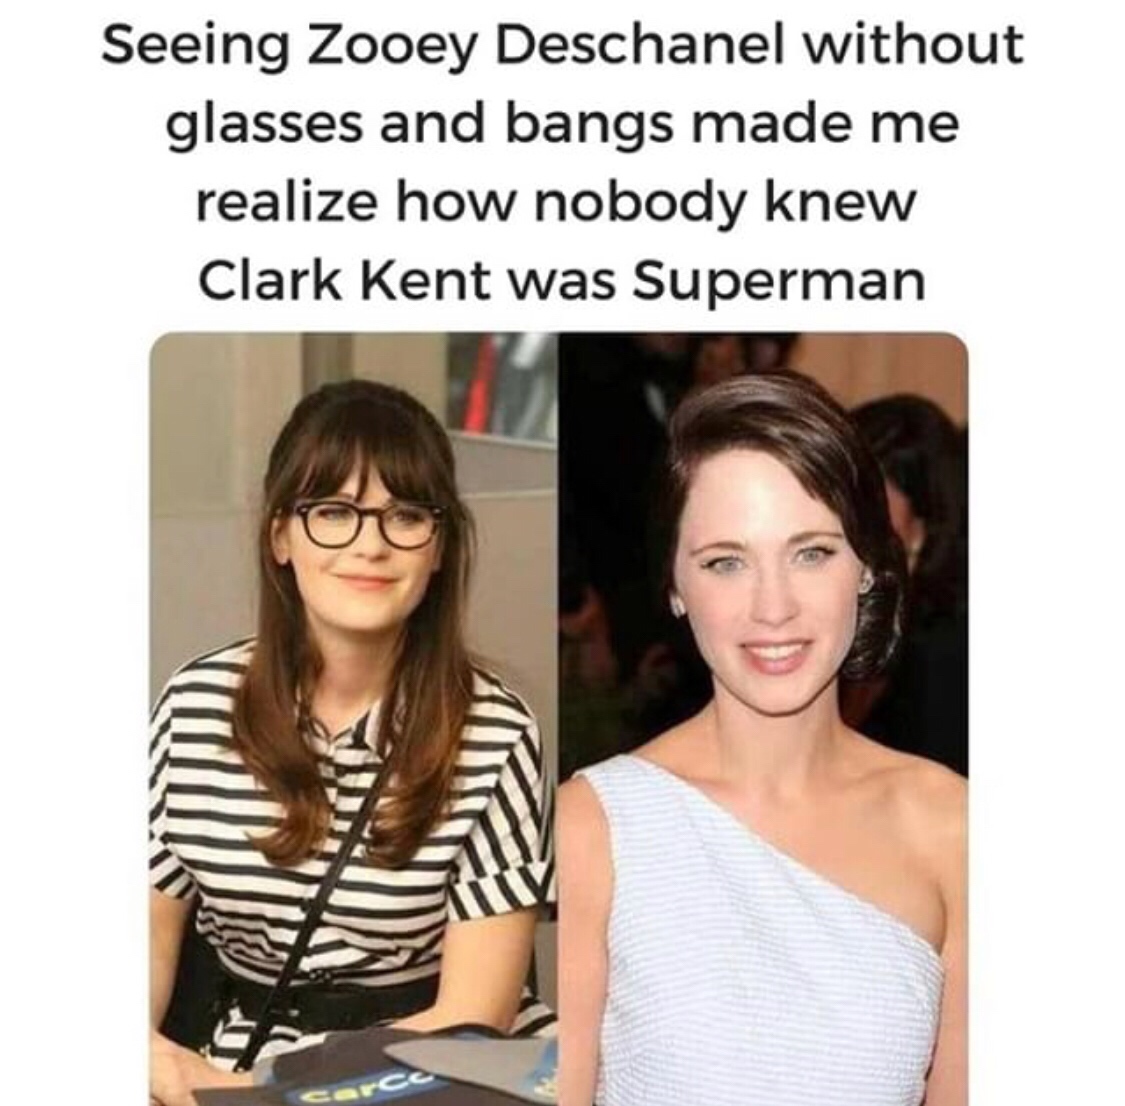 zooey deschanel superman - Seeing Zooey Deschanel without glasses and bangs made me realize how nobody knew Clark Kent was Superman